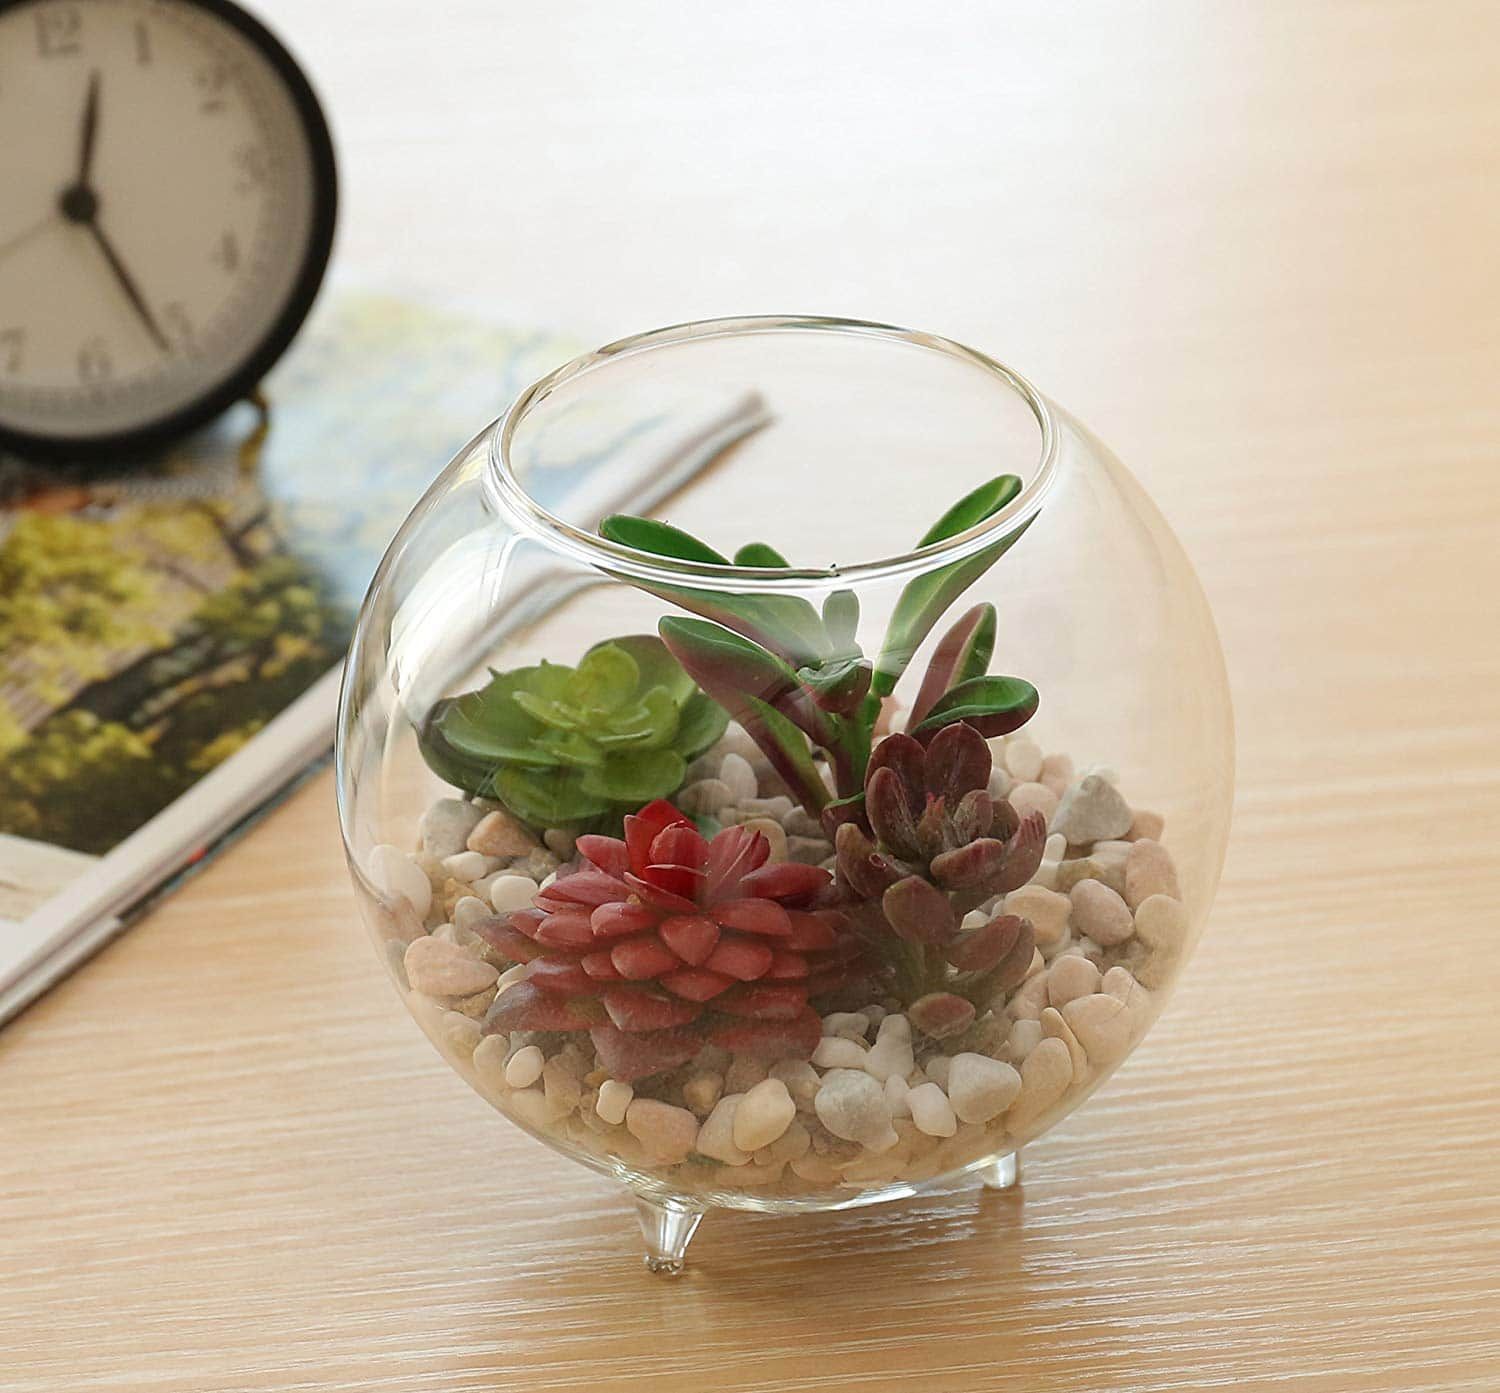 Succulent plant placed inside a round transparent glass with feet along with white little stones